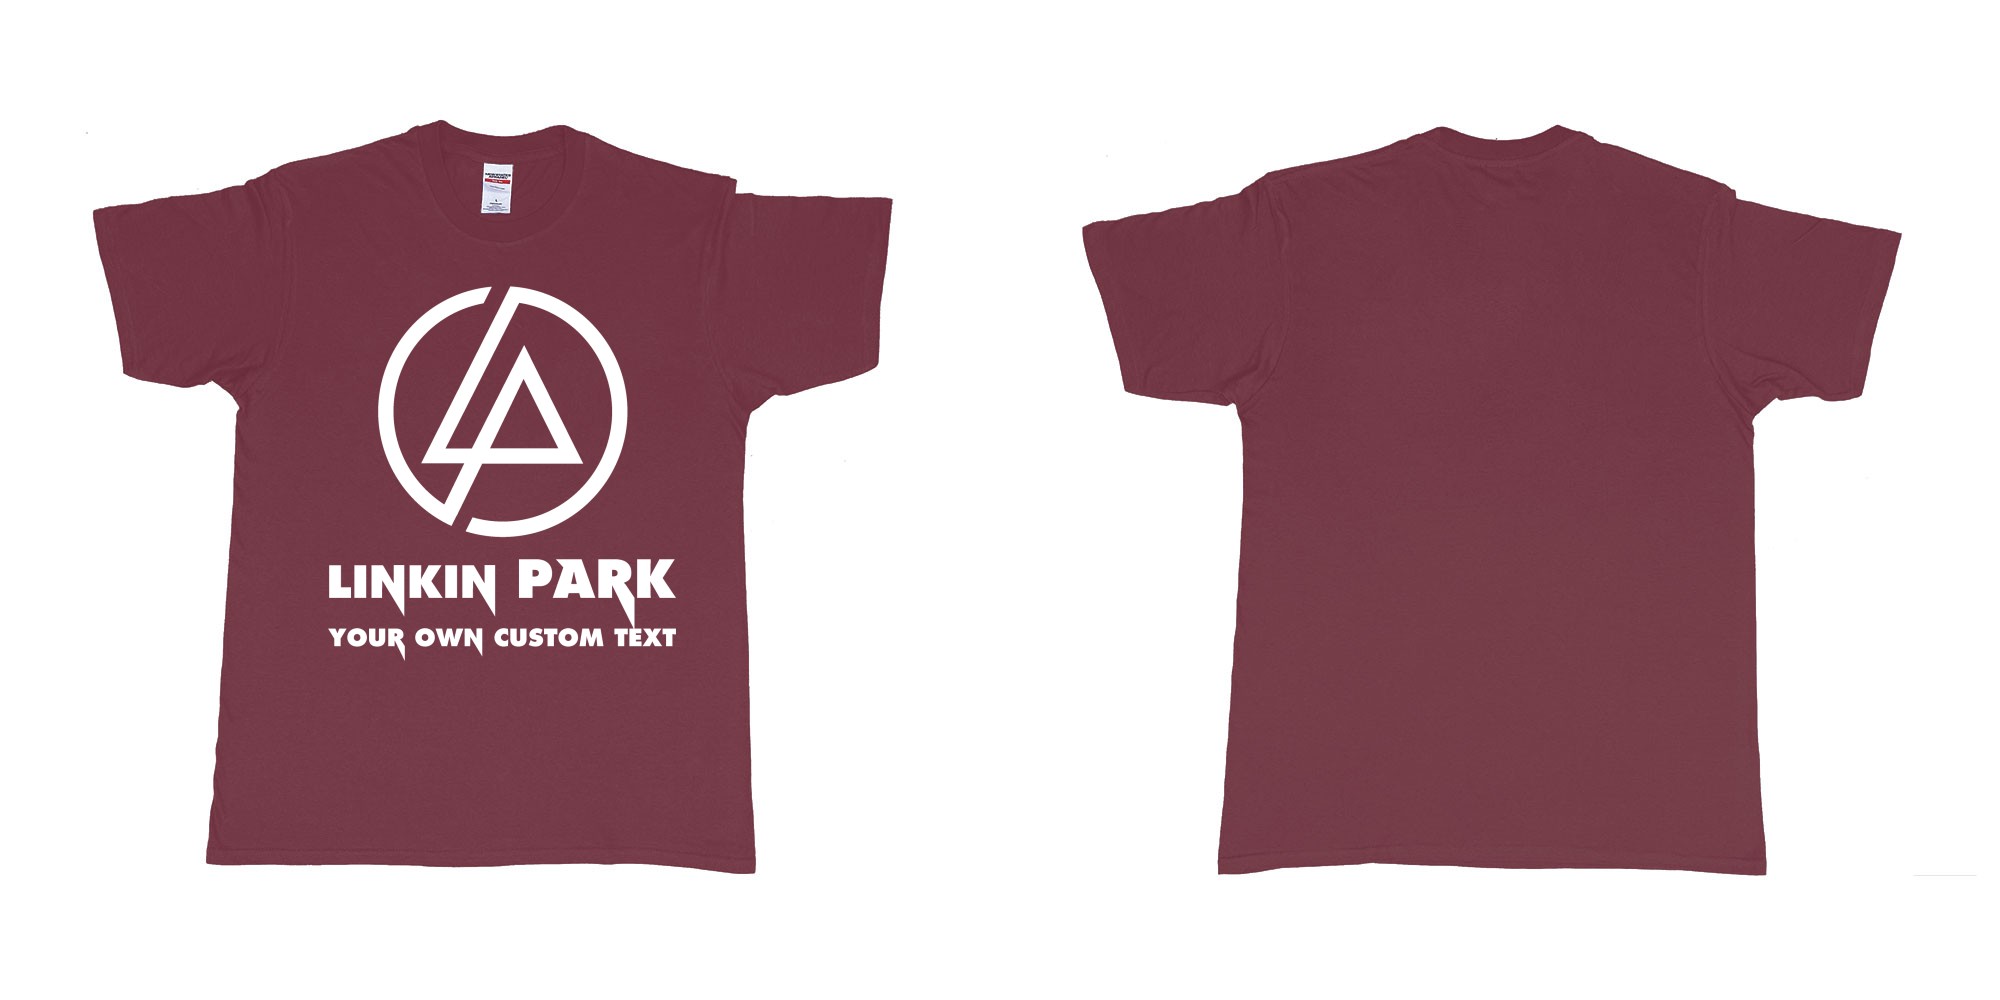 Custom tshirt design linkin park custom tshirt printing bali in fabric color marron choice your own text made in Bali by The Pirate Way